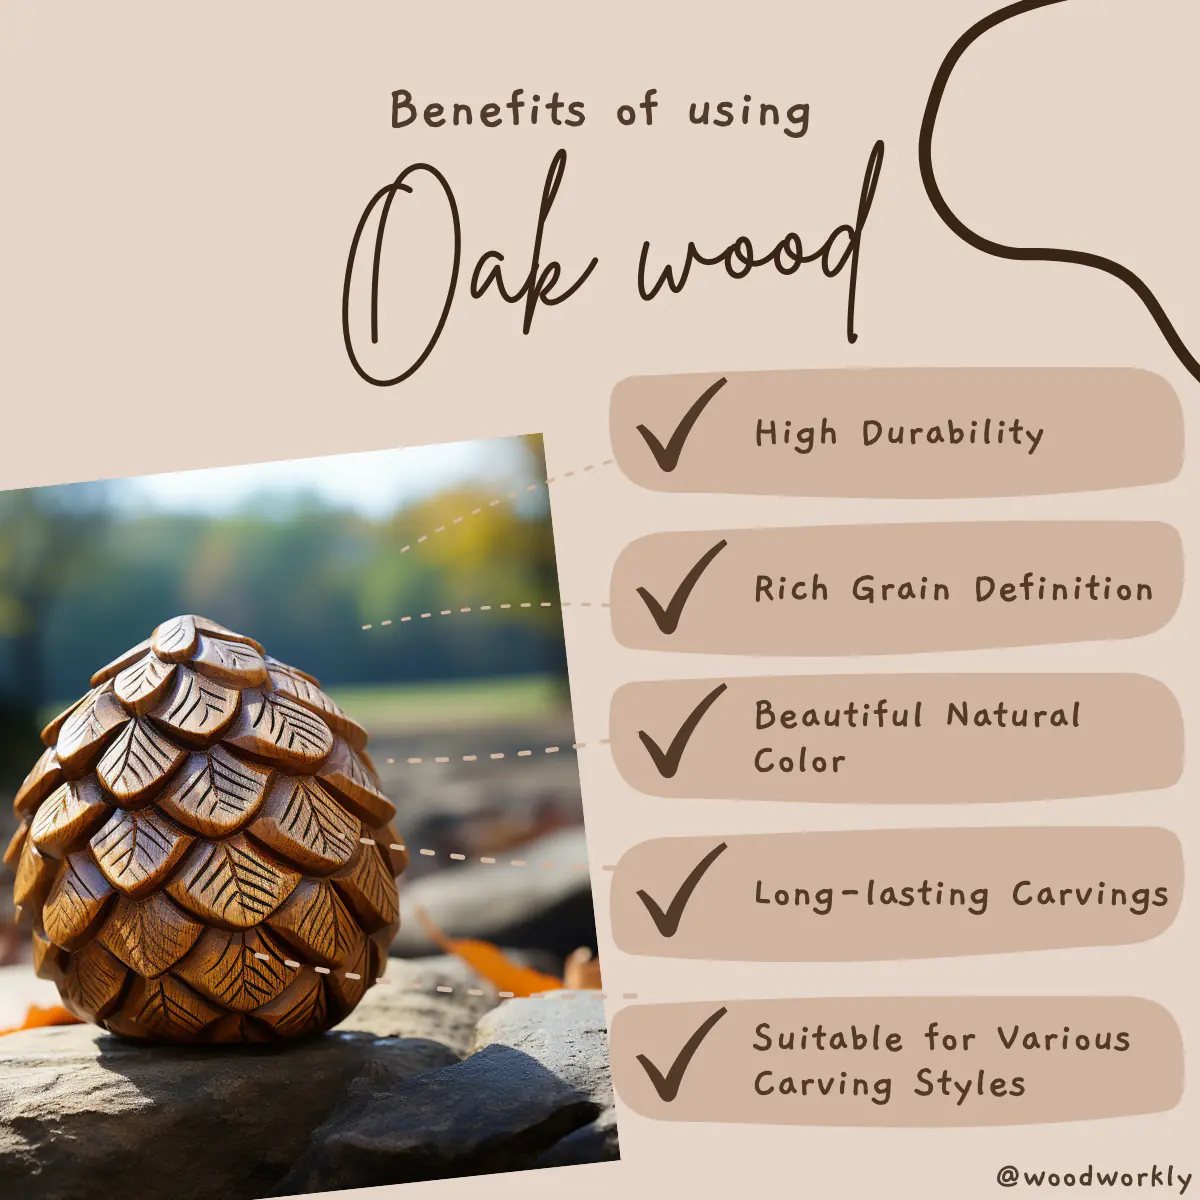 Benefits of using oak wood for carving